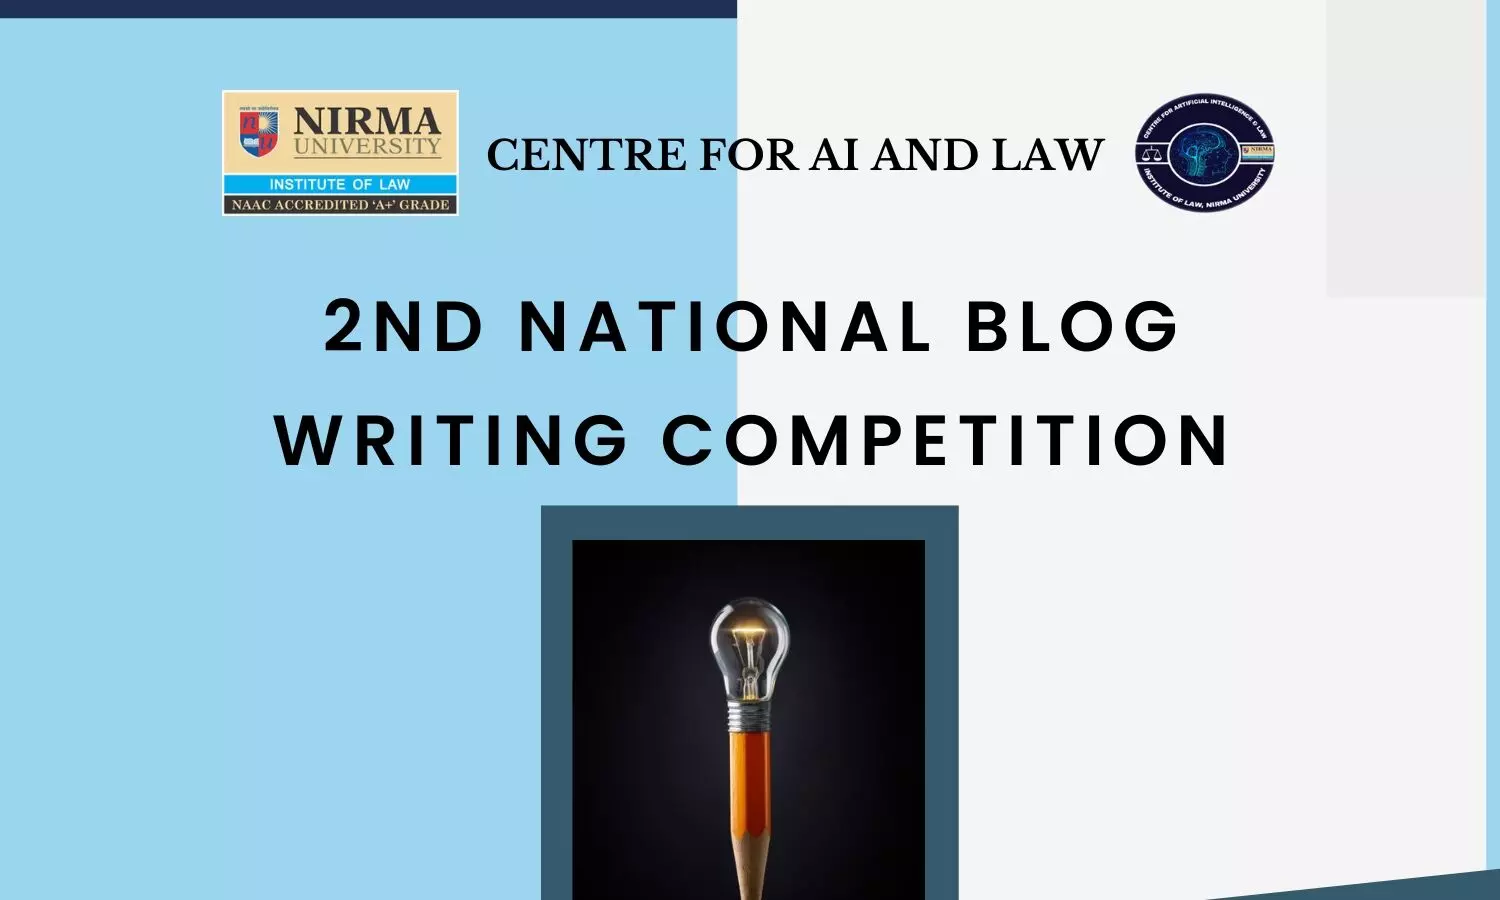 2nd National Blog Writing Competition | Centre for AI and Law, Nirma University